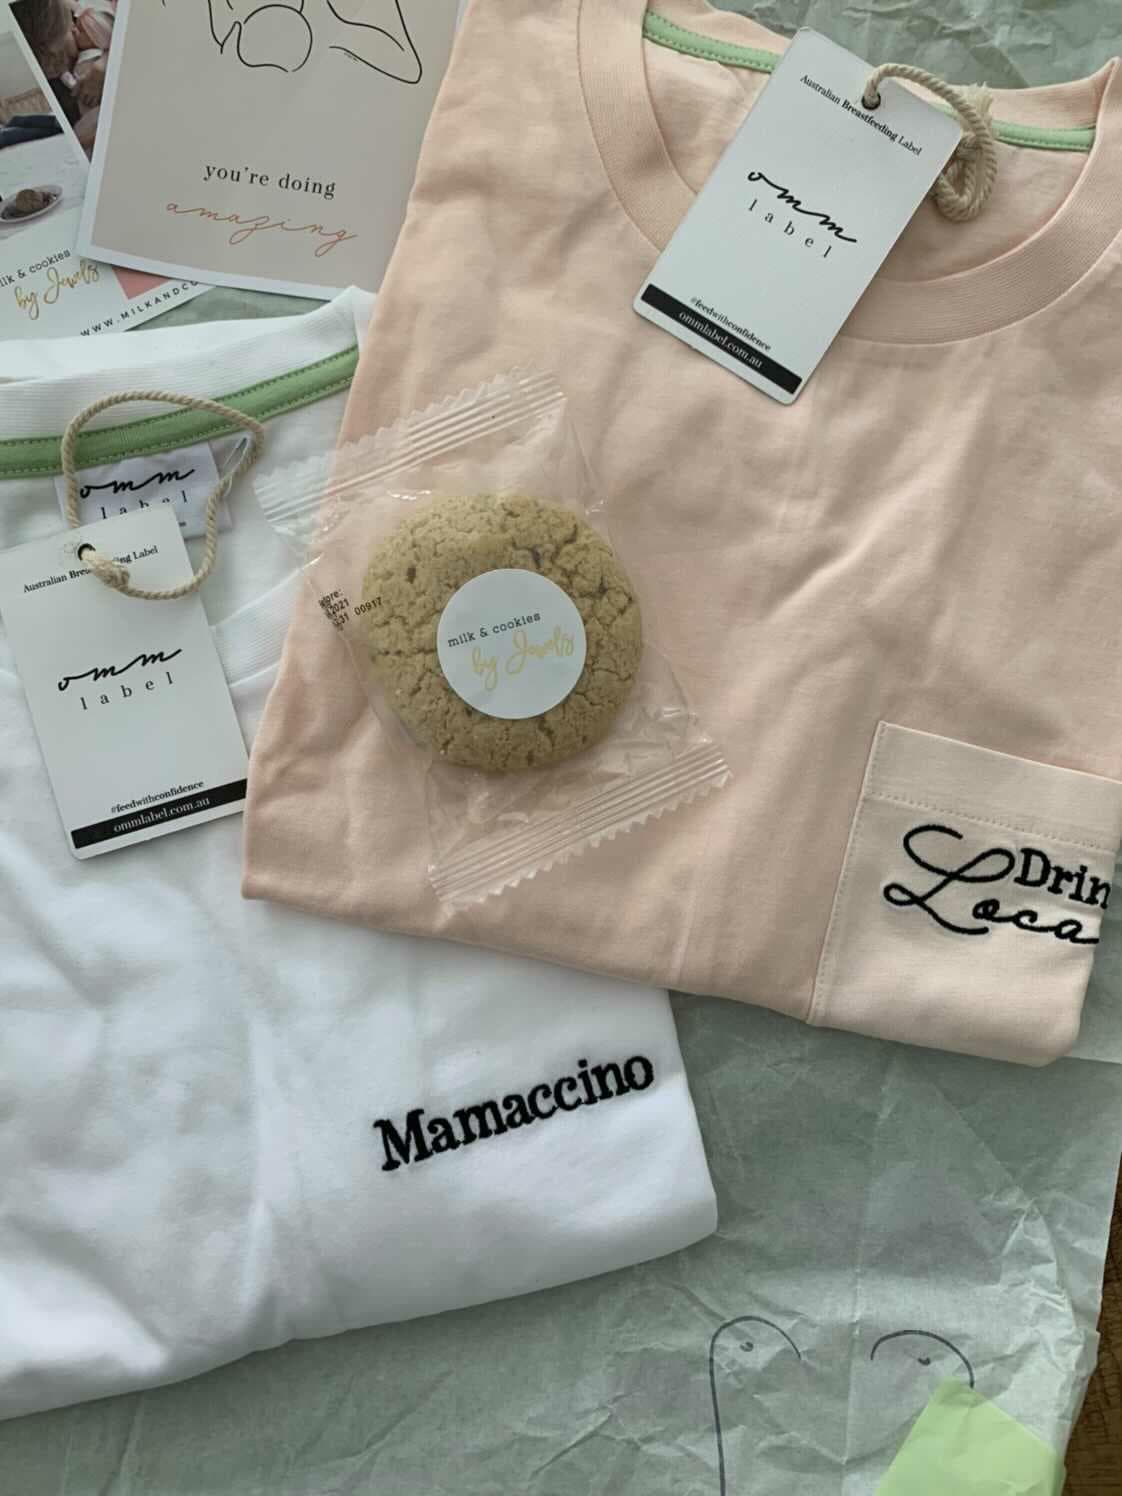 OMM Label: Revolutionary Fashion for Moms on a Mission